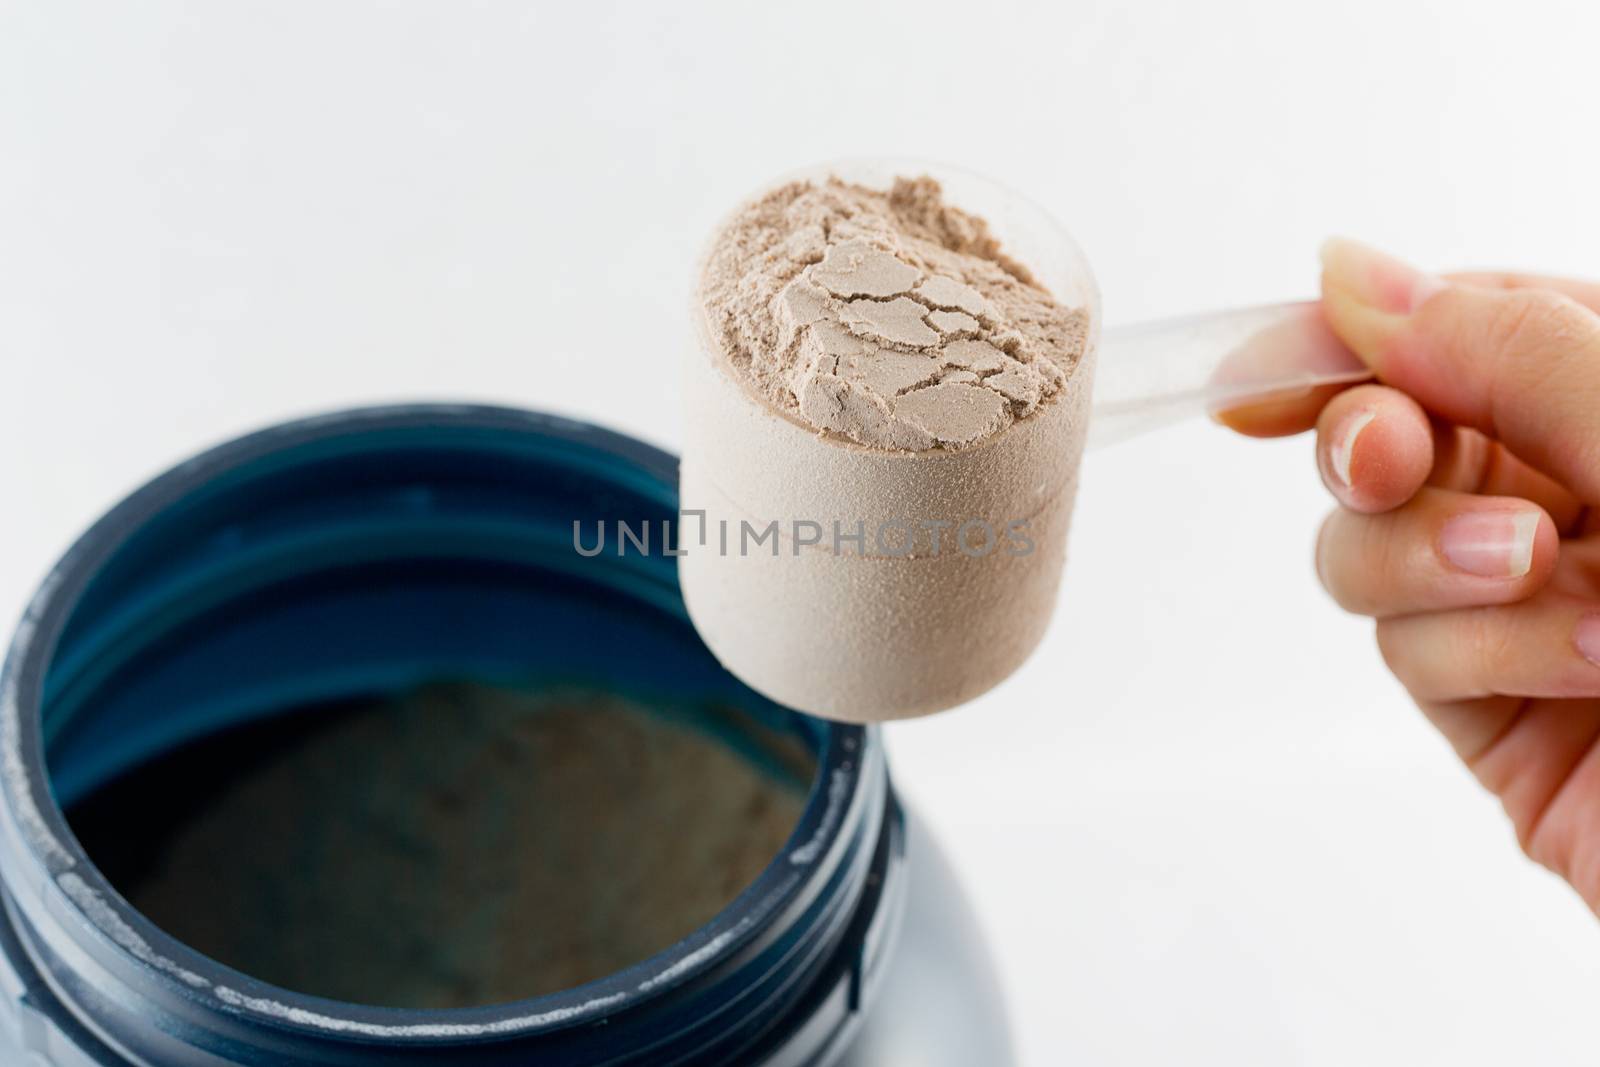 The hand raise a spoon measure Whey protein chocolate powder for by jayzynism